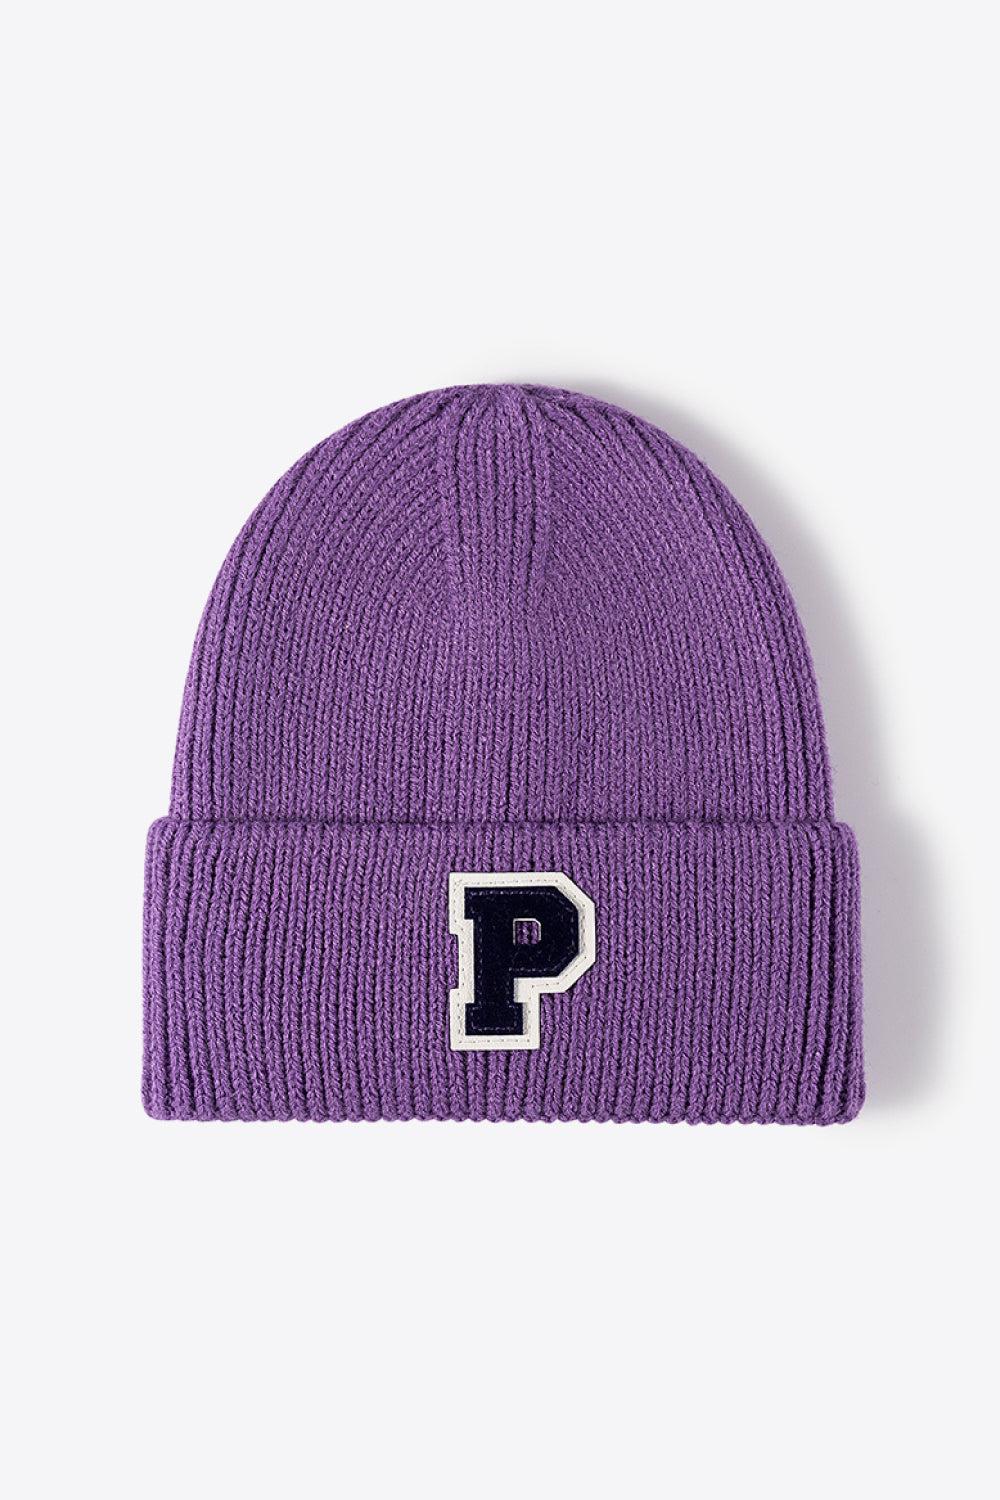 Letter Patch Cuffed Knit Beanie BLUE ZONE PLANET